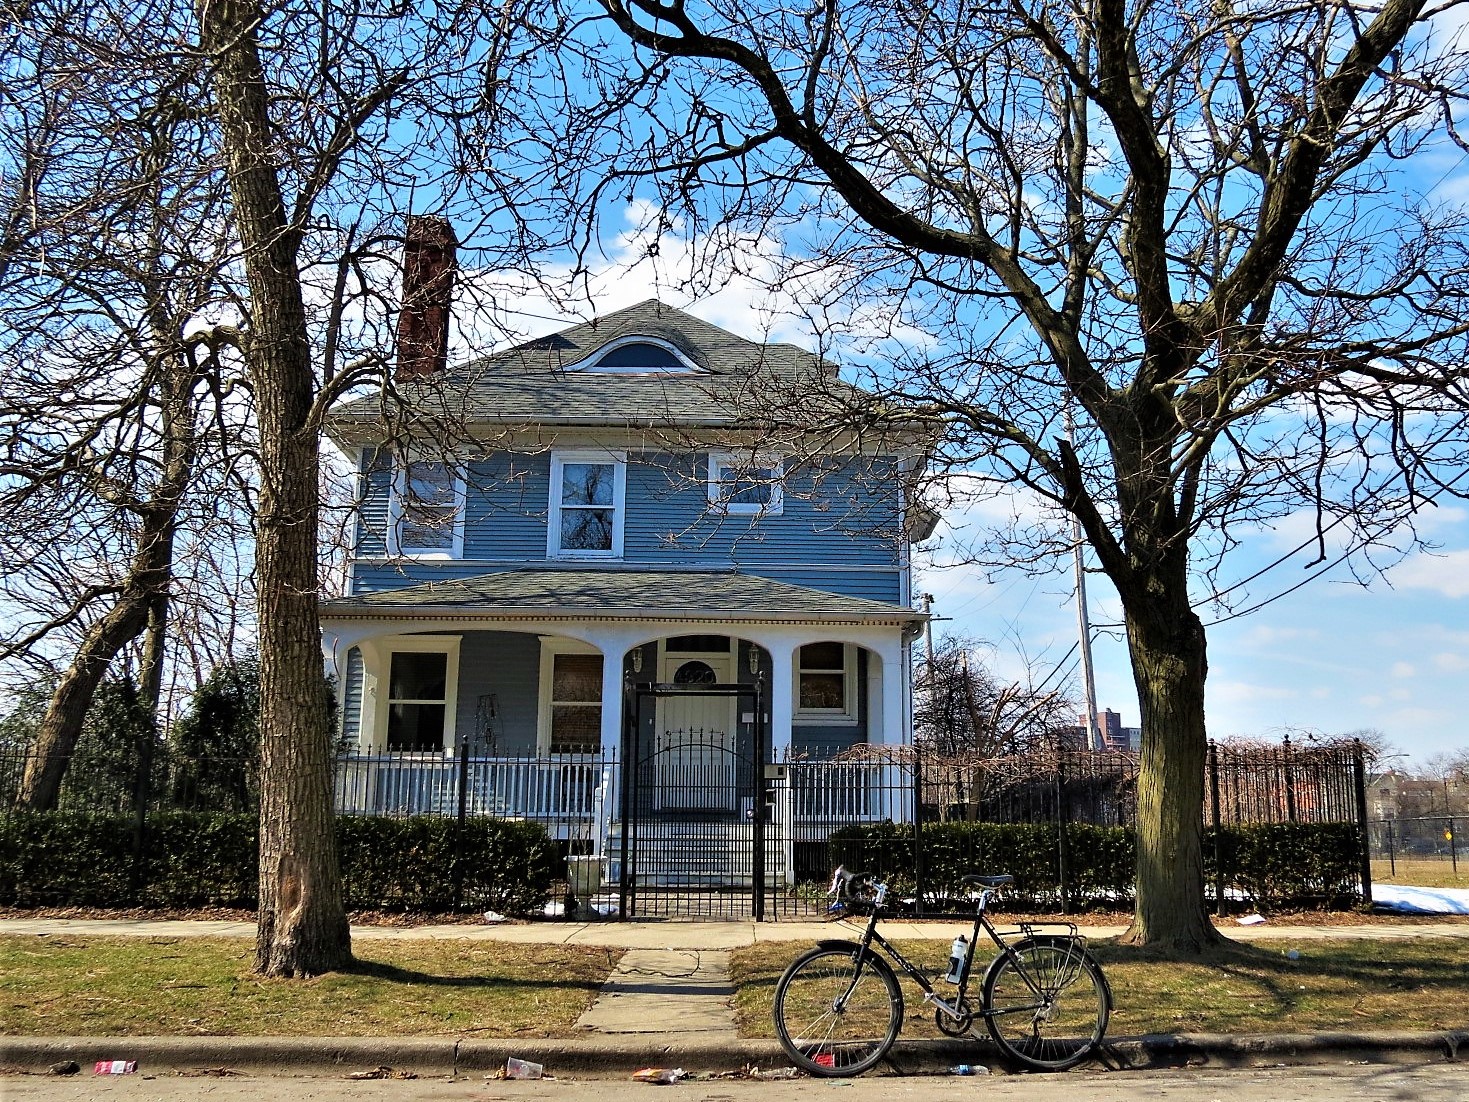 A tour bike standing in front of a pale blue white trim wooden 1880s three story single family home.